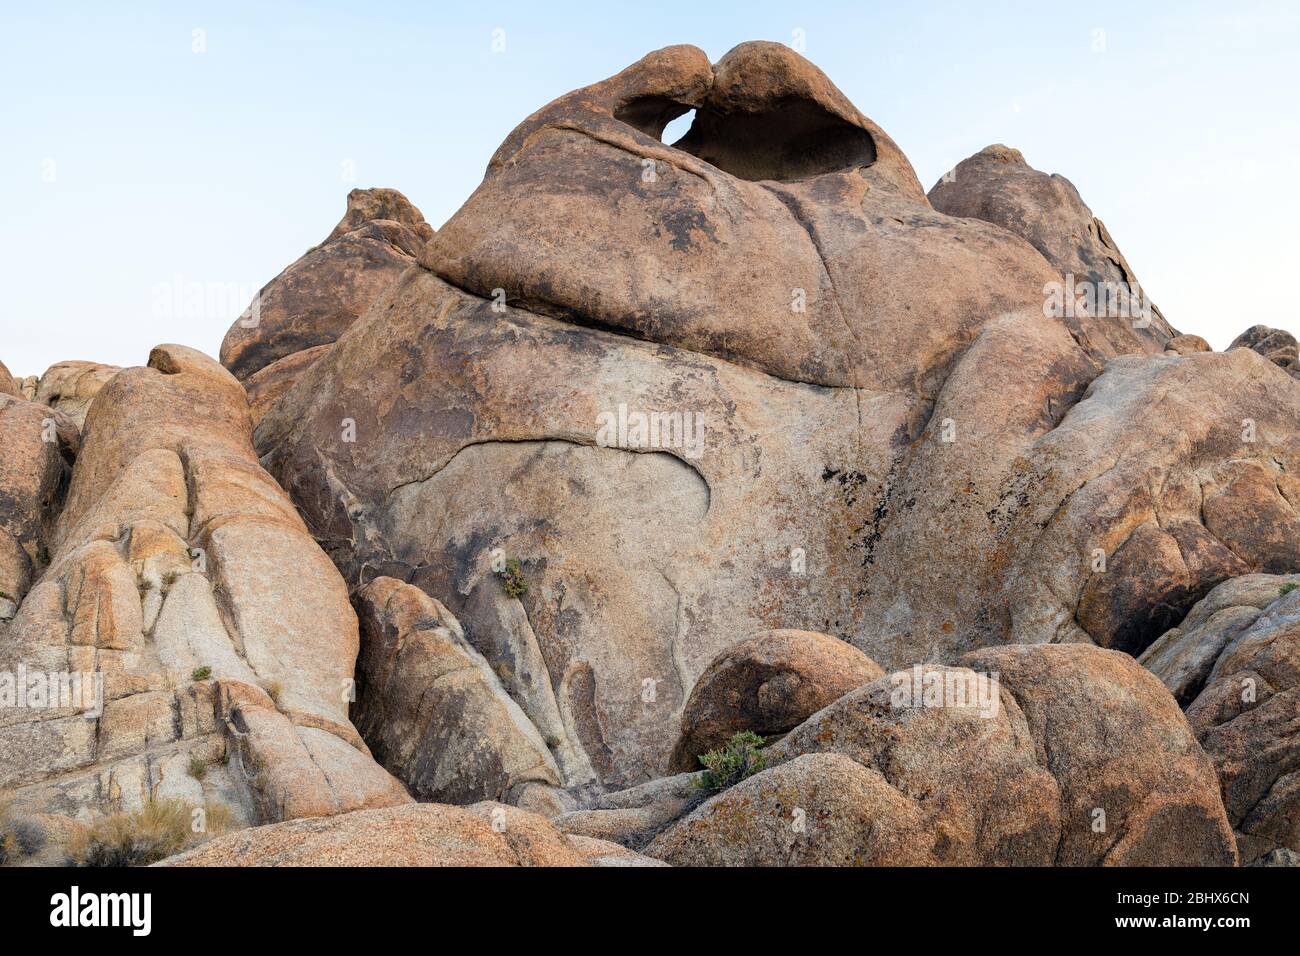 The Heart Arch on the Mobius Arch Trail in the Alabama Hills near Lone Pine, California, USA Stock Photo